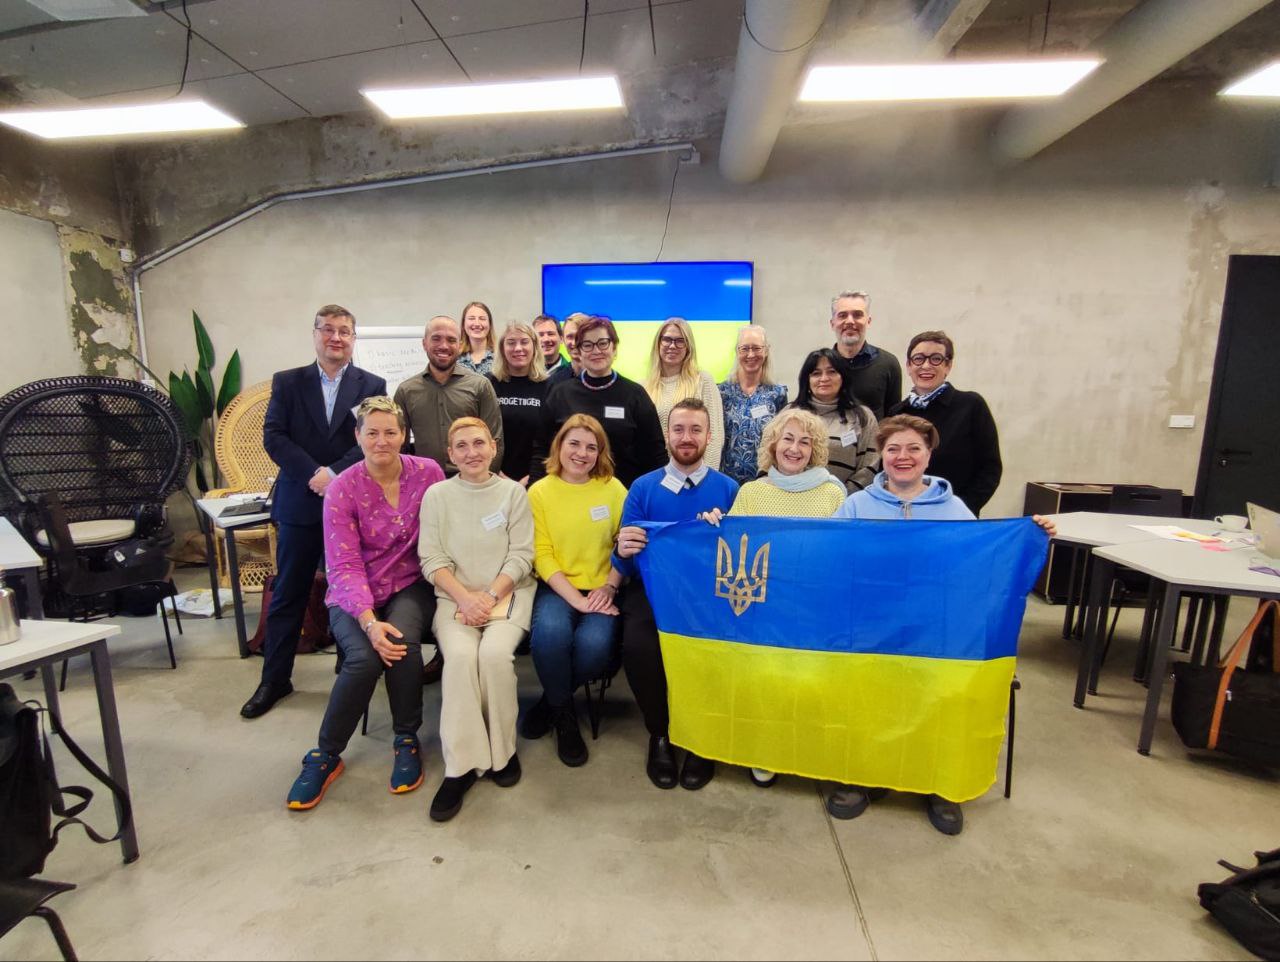 Estonia, Tallinn. Met with the EU STEM Coalition and, together with representatives from Denmark, Finland, Estonia, the Netherlands, Belgium, Australia, and other countries, developed a roadmap for implementing STEM in Ukraine.